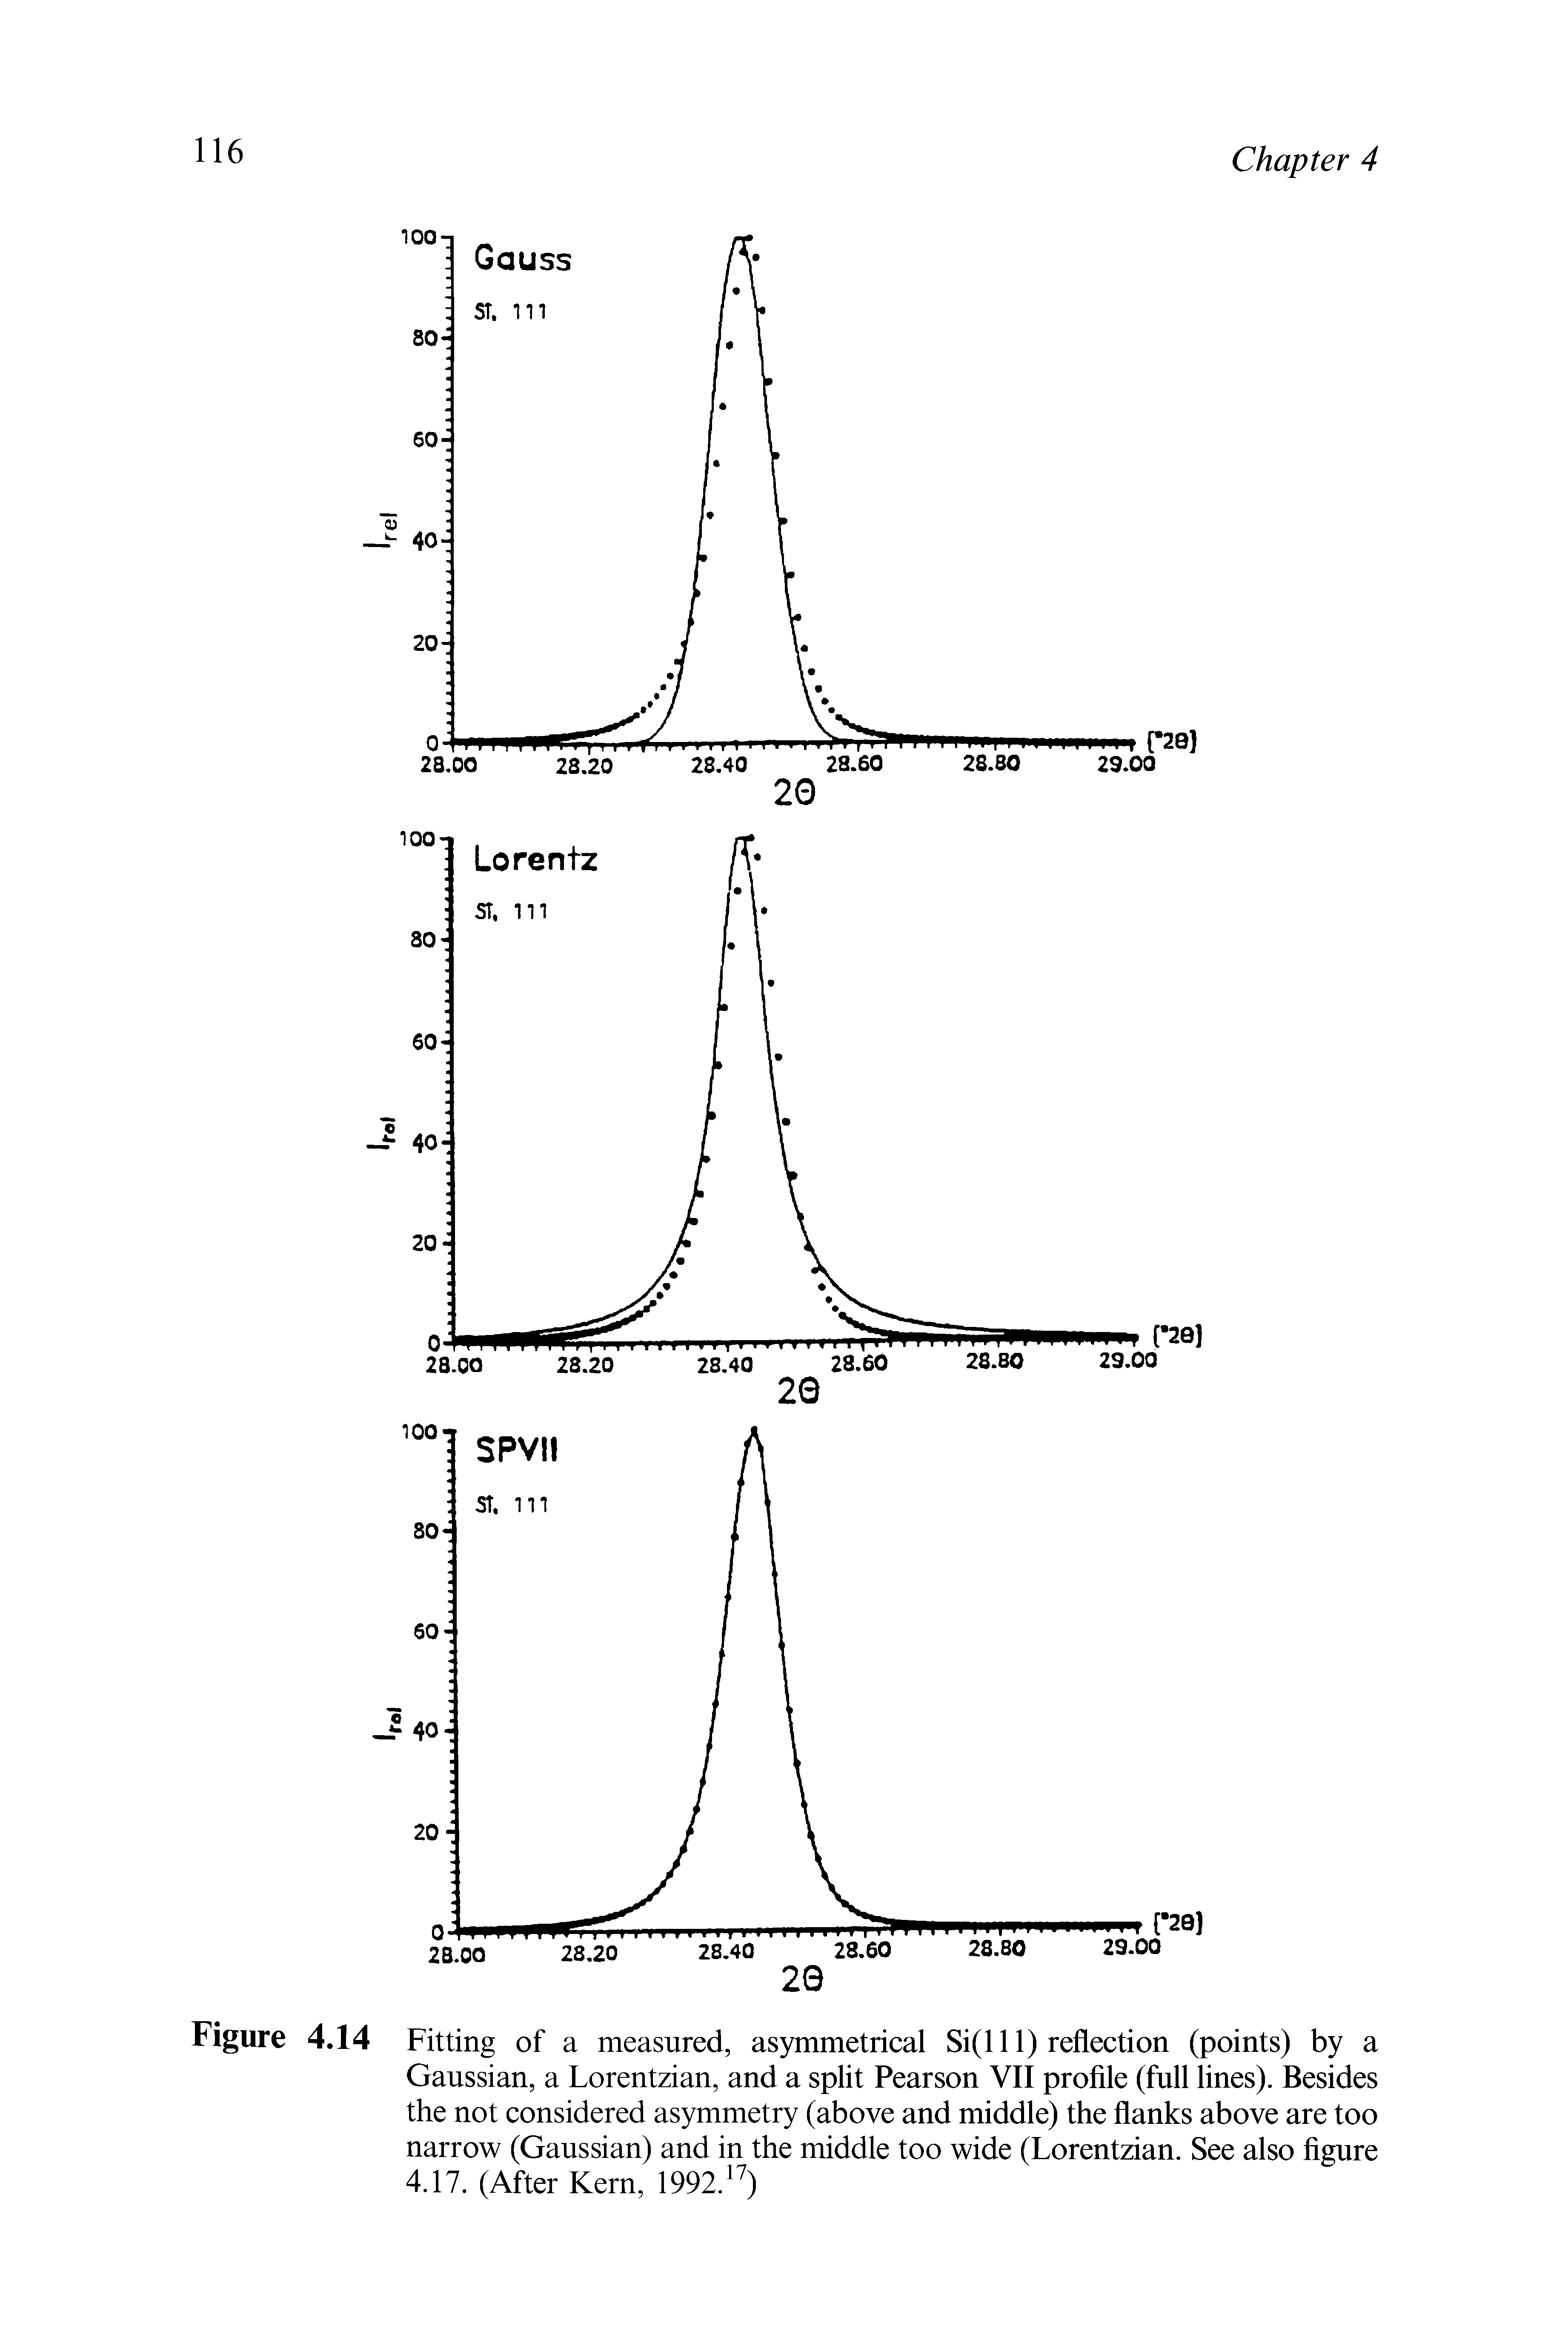 Figure 4.14 Fitting of a measured, asymmetrical Si(l 11) reflection (points) by a Gaussian, a Lorentzian, and a split Pearson VII profile (full lines). Besides the not considered asymmetry (above and middle) the flanks above are too narrow (Gaussian) and in the middle too wide (Lorentzian. See also figure 4.17. (After Kern, 1992. )...